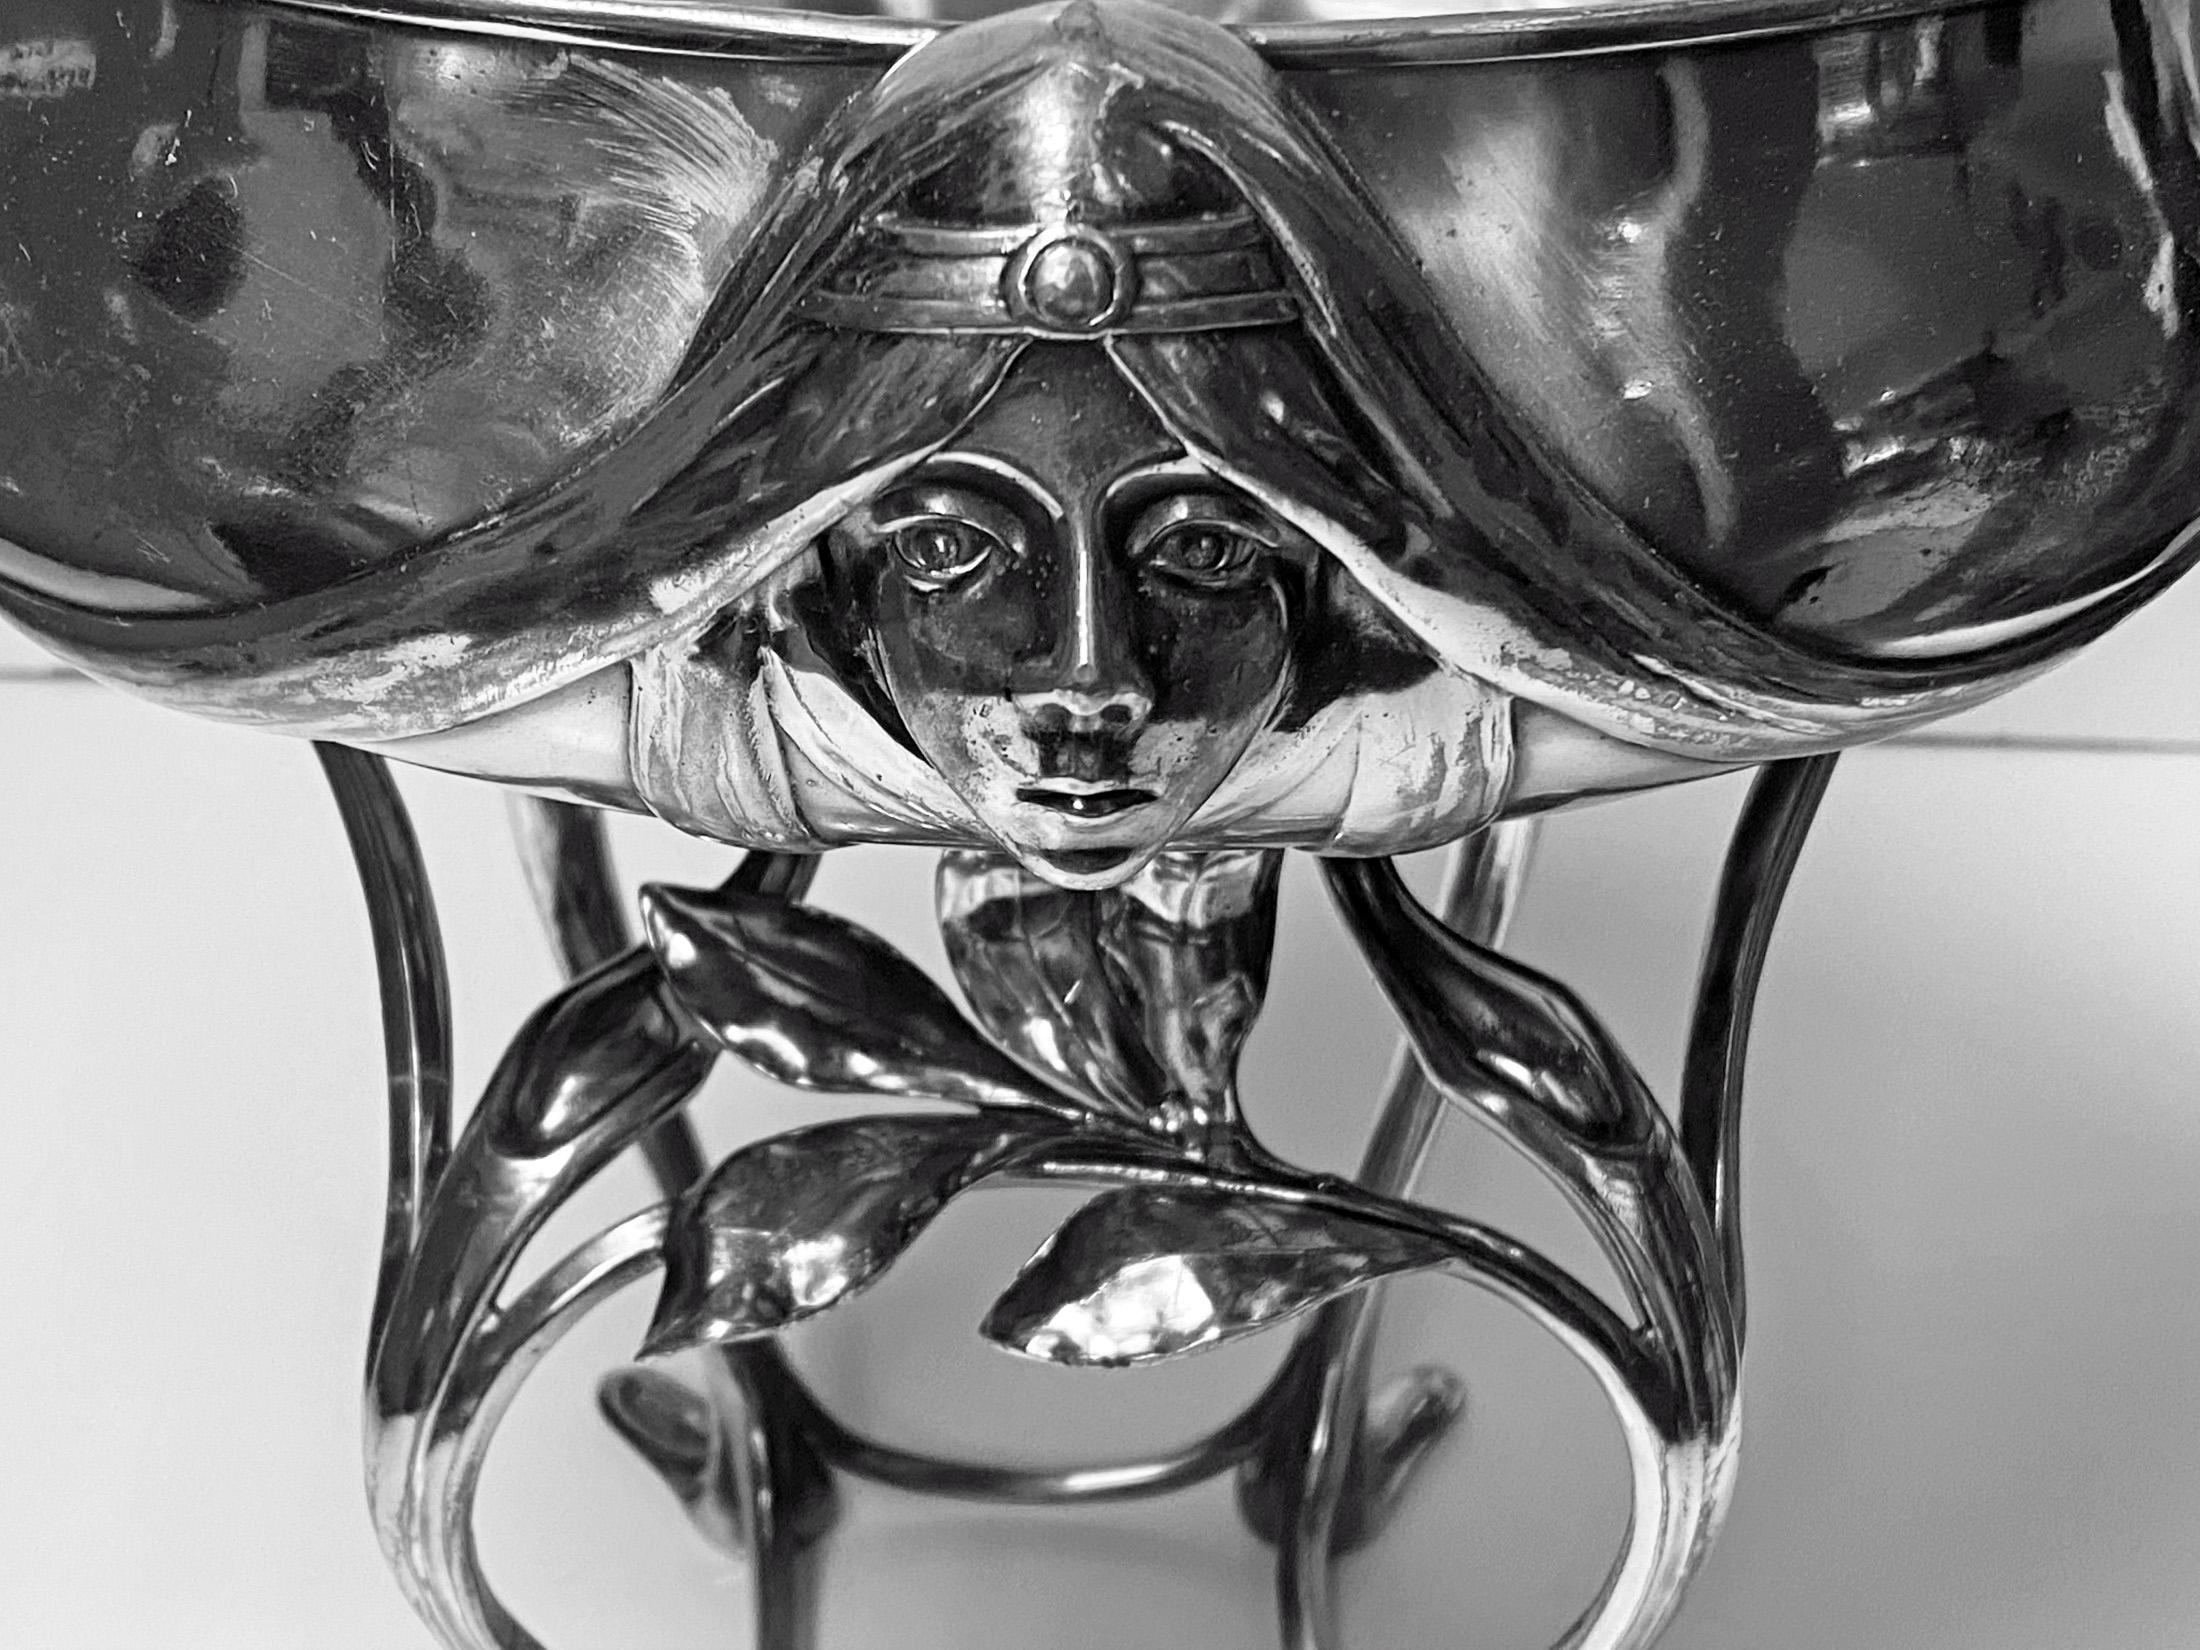 Hugo Leven Art Nouveau Centrepiece, pewter silver plated Germany, circa 1890,depicting a maidenhead with hair flowing around the bowl. Signed twice H. Leven, size: diameter 10.25 inches, width from handle to handle is 16 inches, height 11.50 inches.